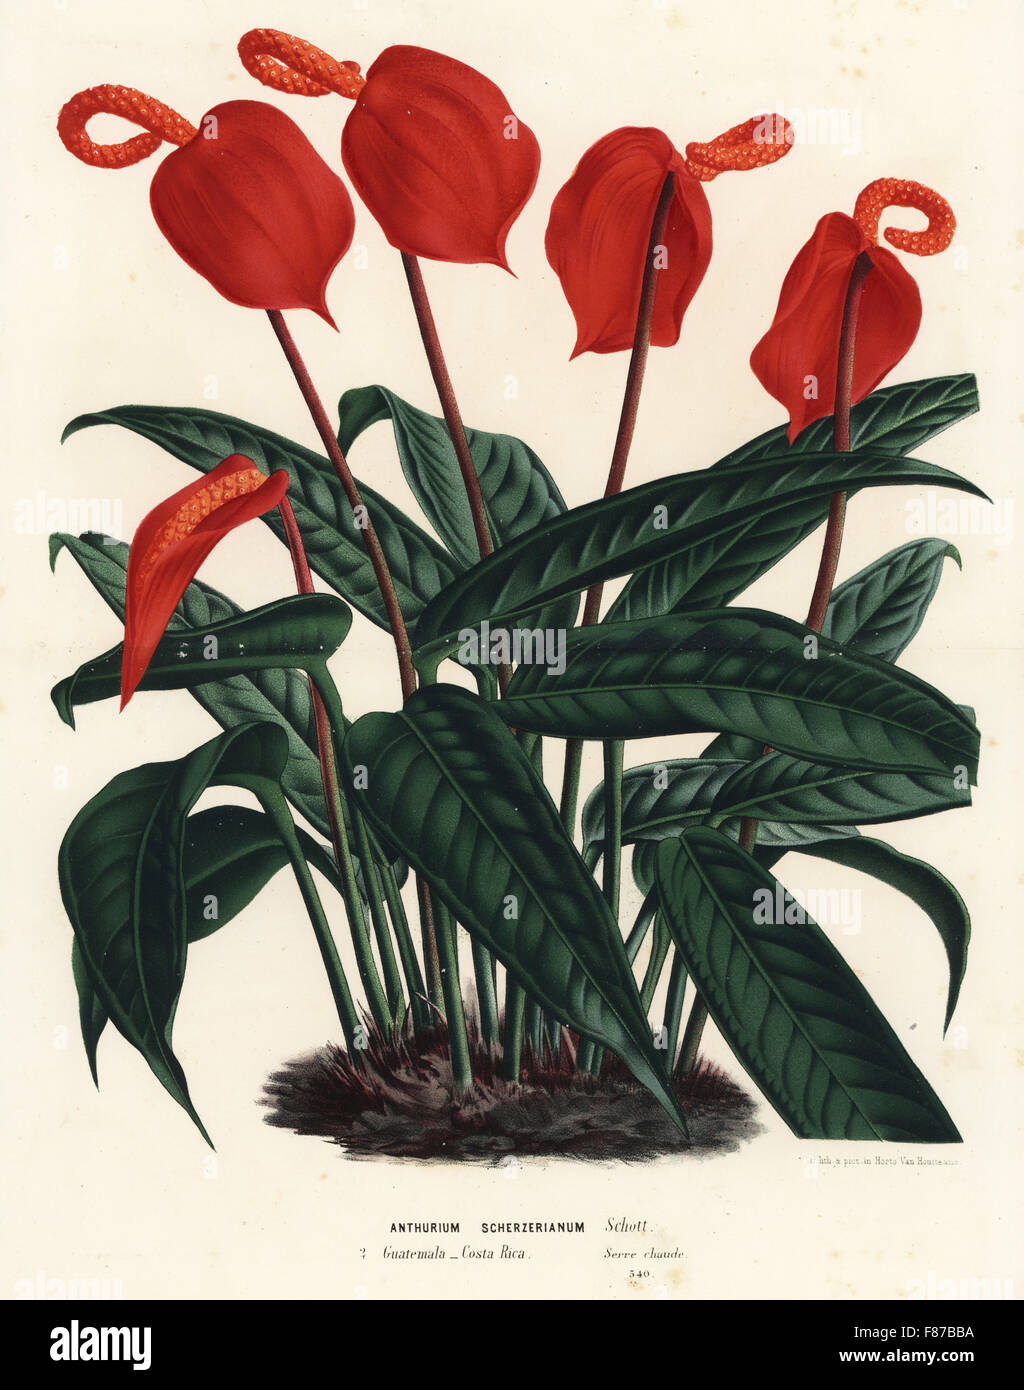 Flamingo flower, Anthurium scherzerianum. Handcoloured lithograph from Louis van Houtte and Charles Lemaire's Flowers of the Gardens and Hothouses of Europe, Flore des Serres et des Jardins de l'Europe, Ghent, Belgium, 1867-1868. Stock Photo